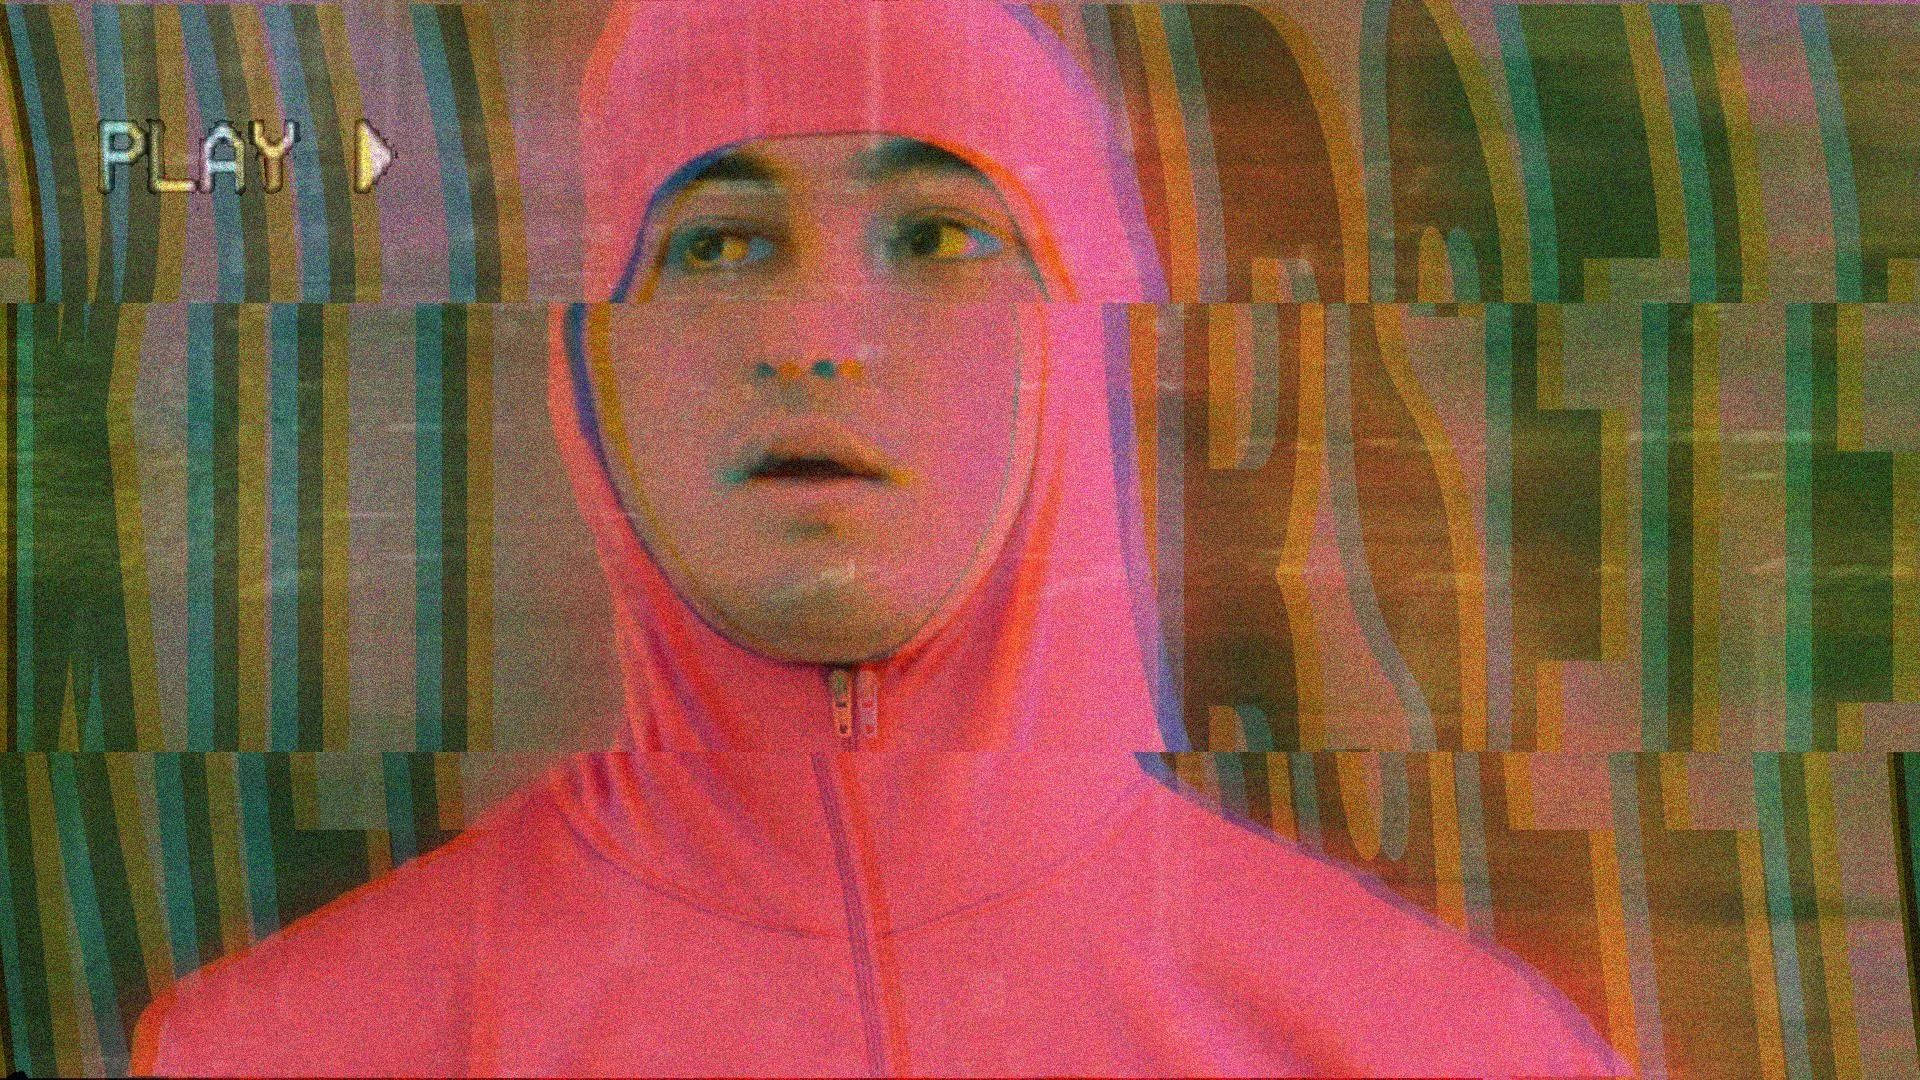 Filthy Frank Distorted Image Background